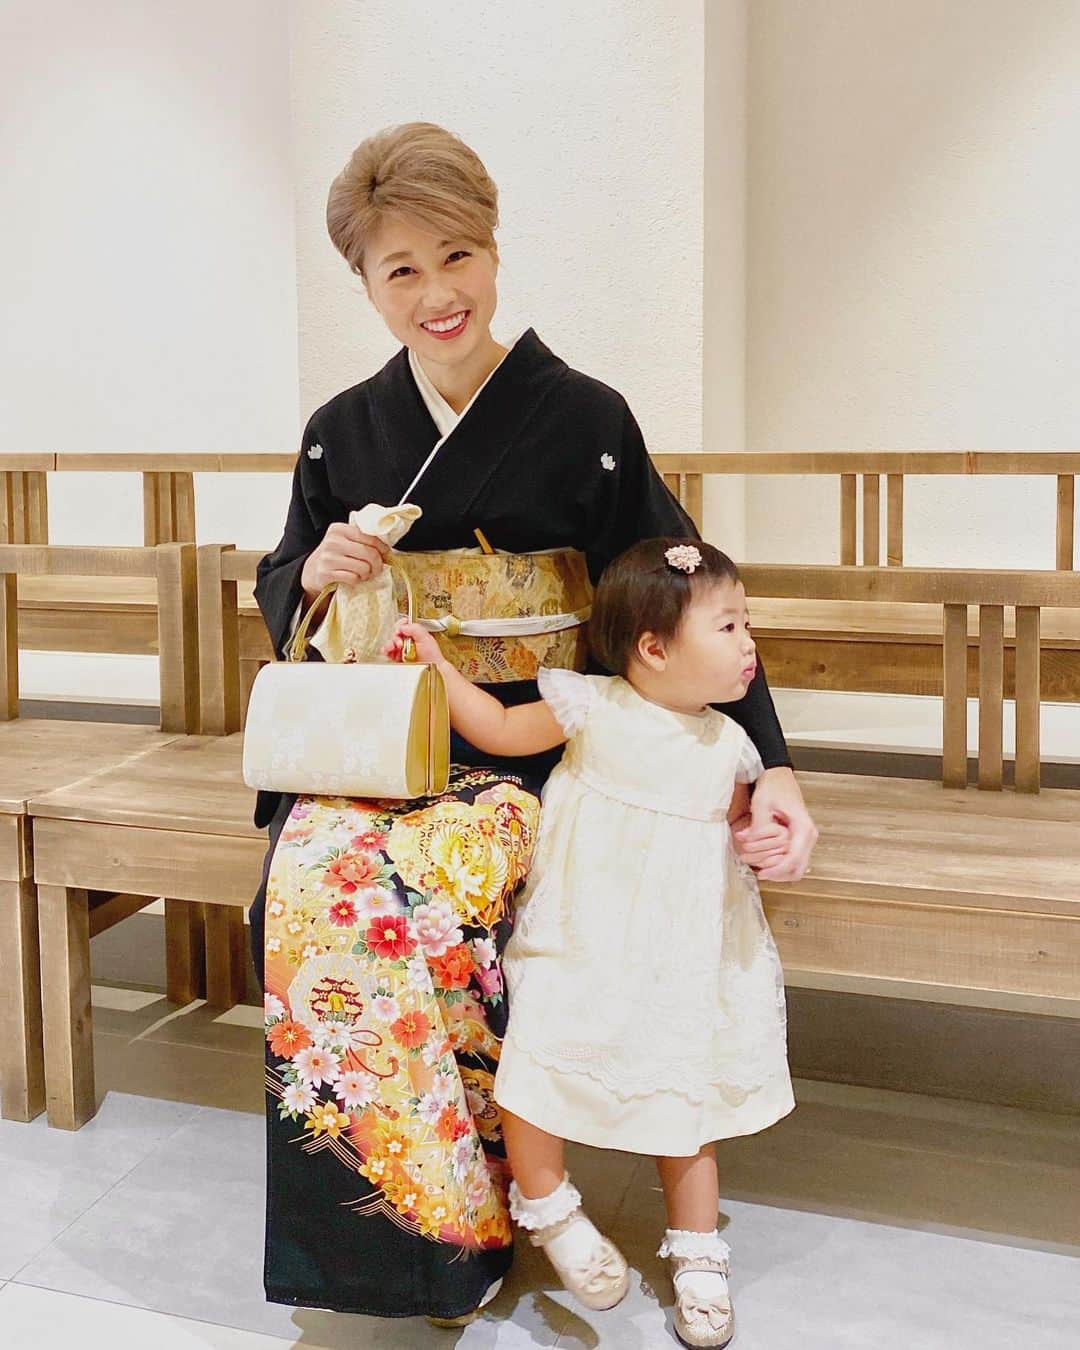 吉田ちかさんのインスタグラム写真 - (吉田ちかInstagram)「Wore my first “tomesode” (a formal kimono worn by married women) to Osaru-san’s little brother’s wedding today!﻿ ﻿ Pudding was asked to be the ring bearer and we were a bit worried that she’d be overwhelmed by the crowd and although she was a bit, she did a great (and quick lol) job. She ran over to her uncle with all her might and handed him the box with the rings💍 ﻿ ﻿ So happy for the newlywed couple! The groom, Osaru-san’s brother came with us to Singapore and he was so good with Pudding and very very helpful! He’s going to make an amazing husband😊 The beautiful bride has actually been watching my videos for awhile so she knows a lot more about me than I do about her, but I’m looking forward to getting to know her better and changing that! ﻿ ﻿ 今日はおさるさんの弟の結婚式で初めて留袖を着ました！﻿ ﻿ プリンがリングガールをお願いされて、会場に圧倒されてしまうのではないかな〜と思っていたのですが、最近のmeet-upでイベント慣れしたのか、しっかり任務を務めてくれました！必死に大好きな叔父に走っていき、無事リングボックスを渡せました💍💕﻿ ﻿ 新郎、おさるさんの弟は、先月撮影とプリンの手伝いでシンガポールに一緒に来てくれました。プリンと遊ぶのも、とても上手で気が効いてこれは良い旦那さんになる！と思いました😉新婦はなんとちか友で！前から動画を見てくれていました。私のことは色々と知ってくれているので、これから彼女のことも色々と知って仲良くなりたいです❤️ 2人とも、本当におめでとう！﻿ ﻿ #髪の毛 #大きい #銀座感🤣 #着付けが終わっておさるさんに会ったら #面白いね #極妻？ #と言われた😅 #シンガポール動画アップしました❣️」2月16日 23時07分 - bilingirl_chika